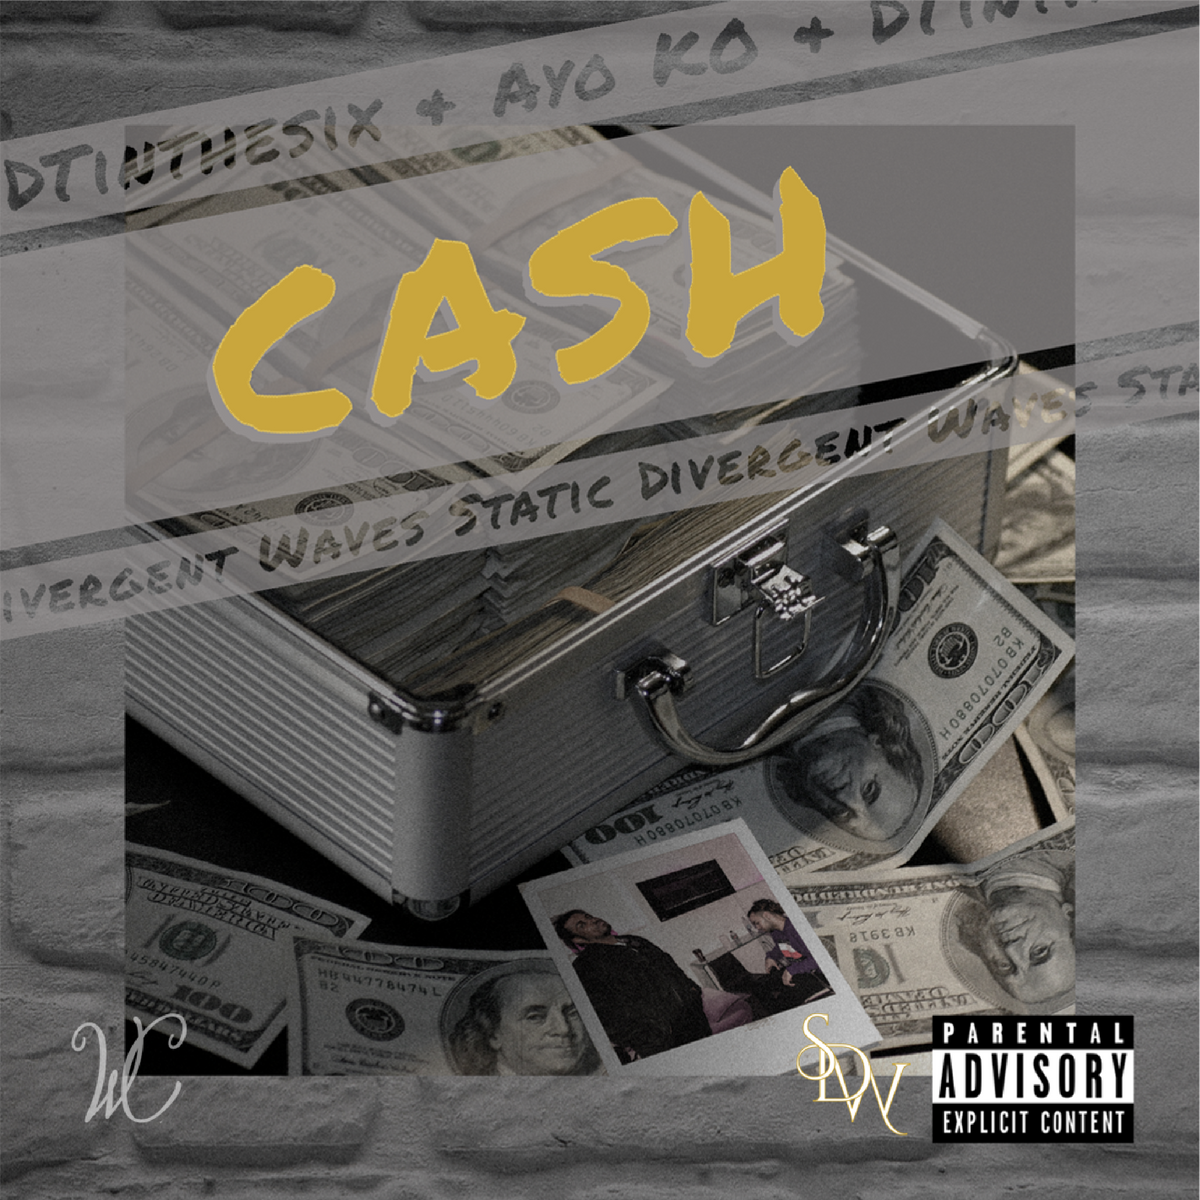 Cash single release - performed by Matri6 and produced by Ayo KO